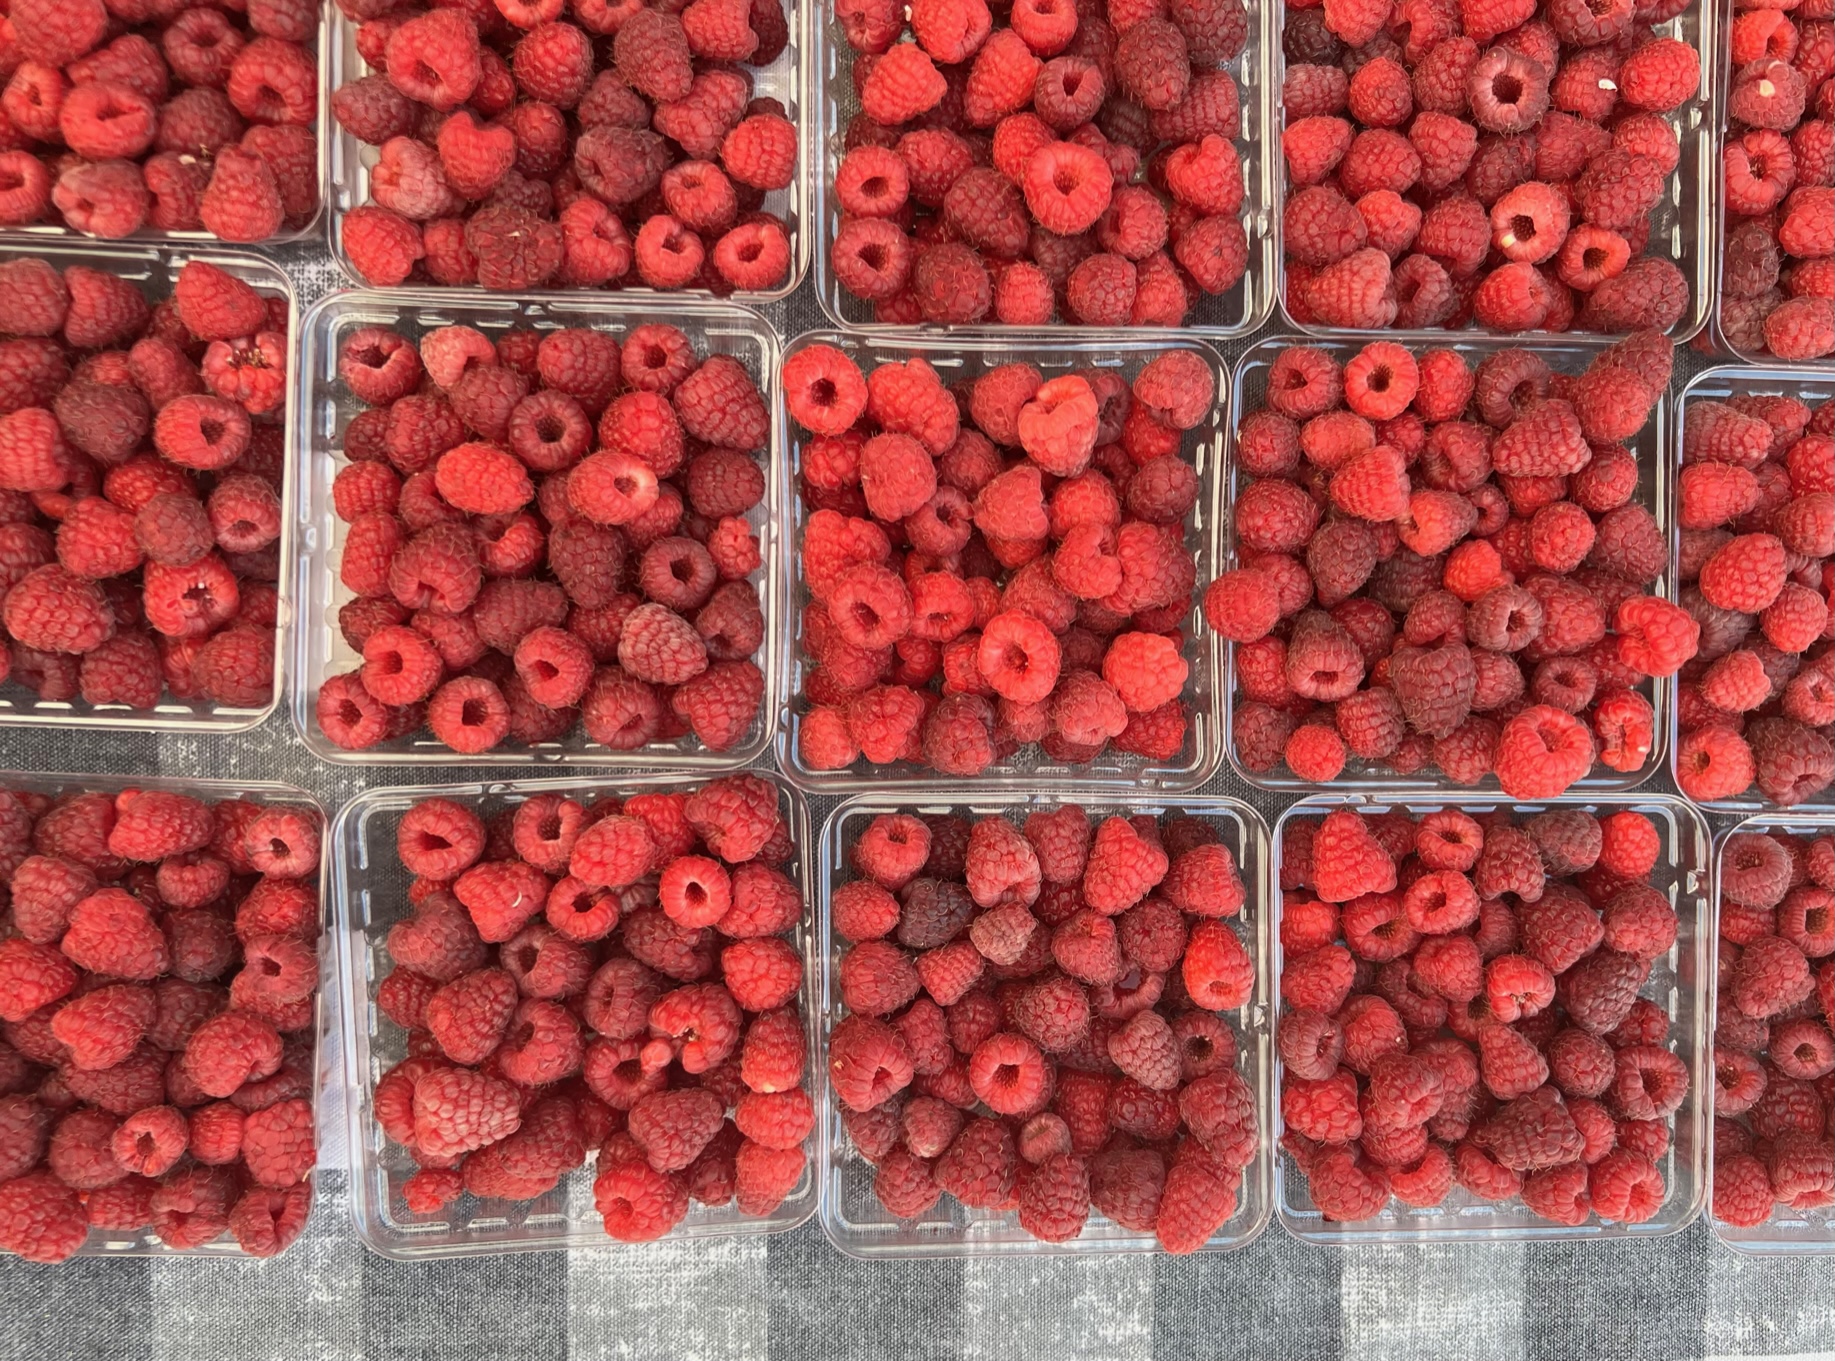 A variety of raspberries for sale by Ben & Molly's Farm at the farmers' market. Photo by Alyssa Buckley.